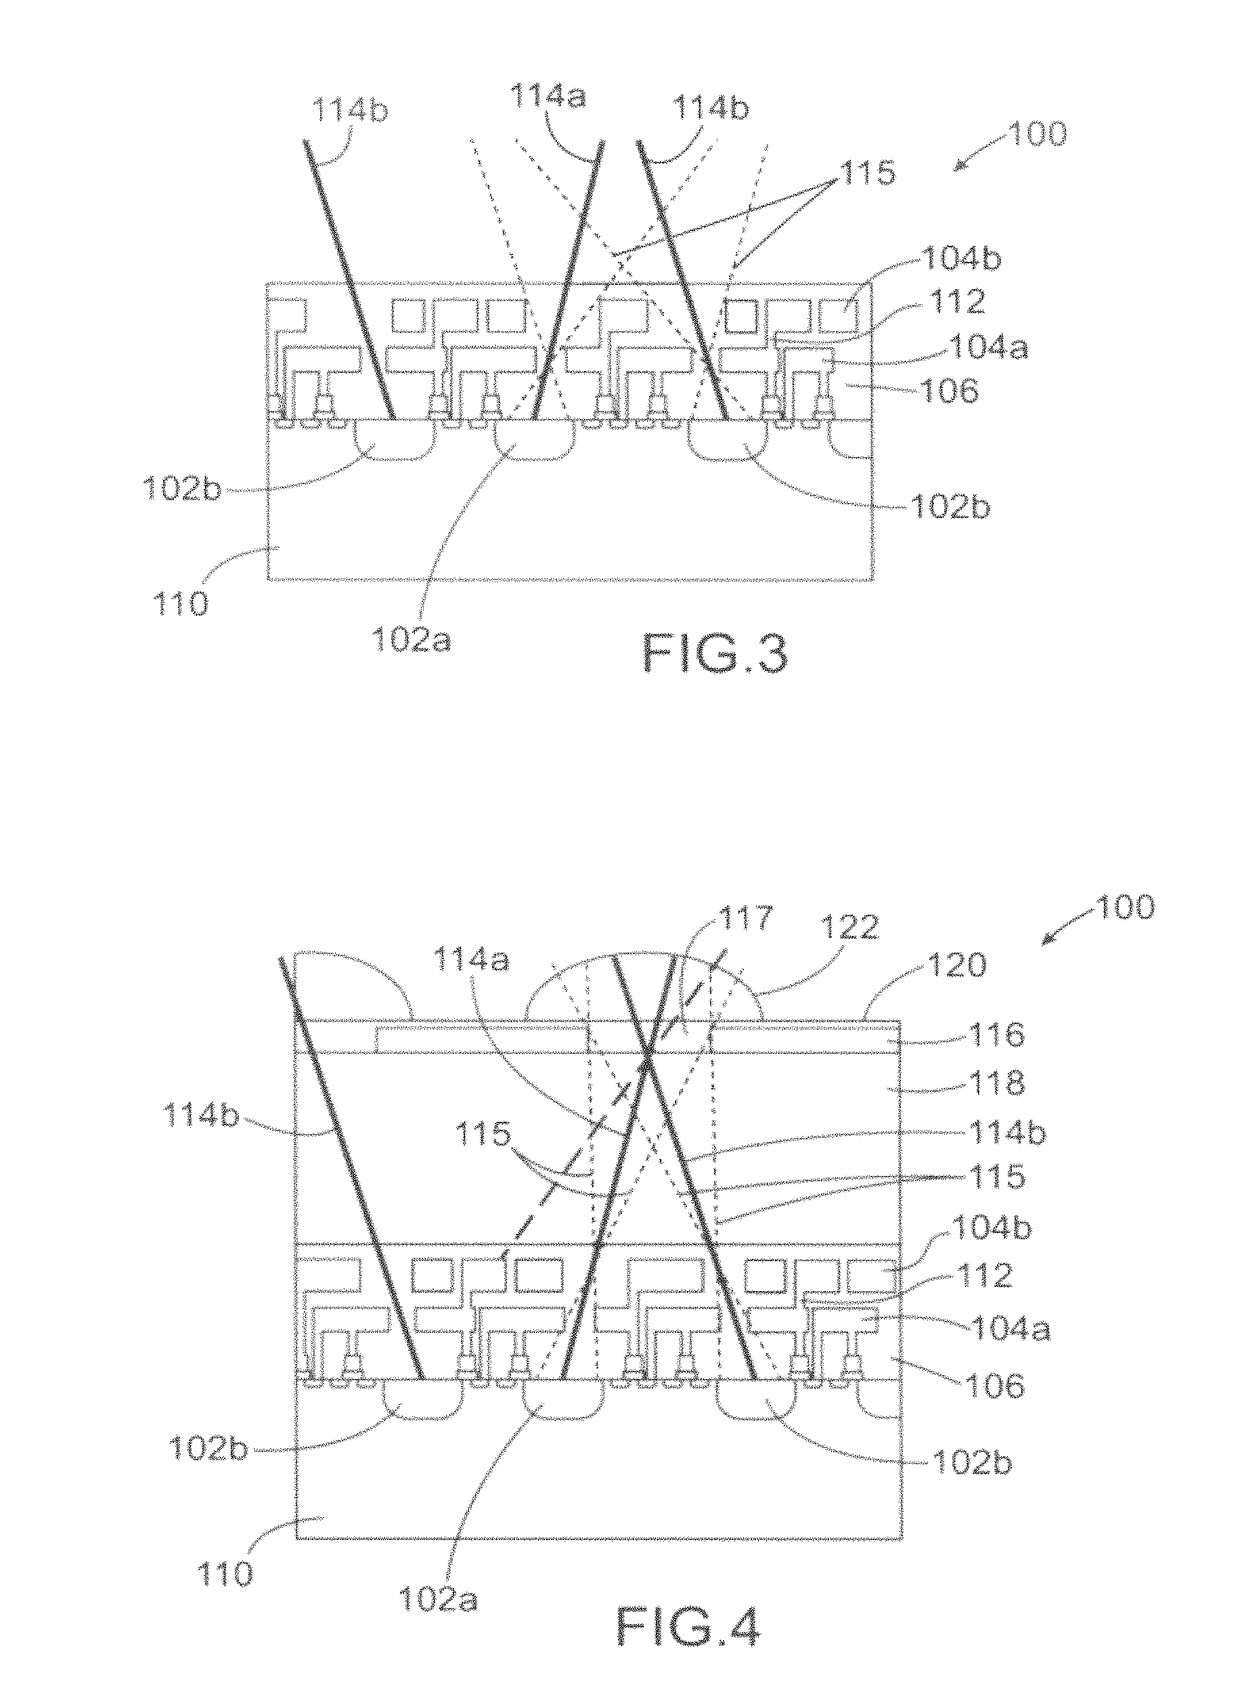 Imager integrated circuit and stereoscopic image capture device